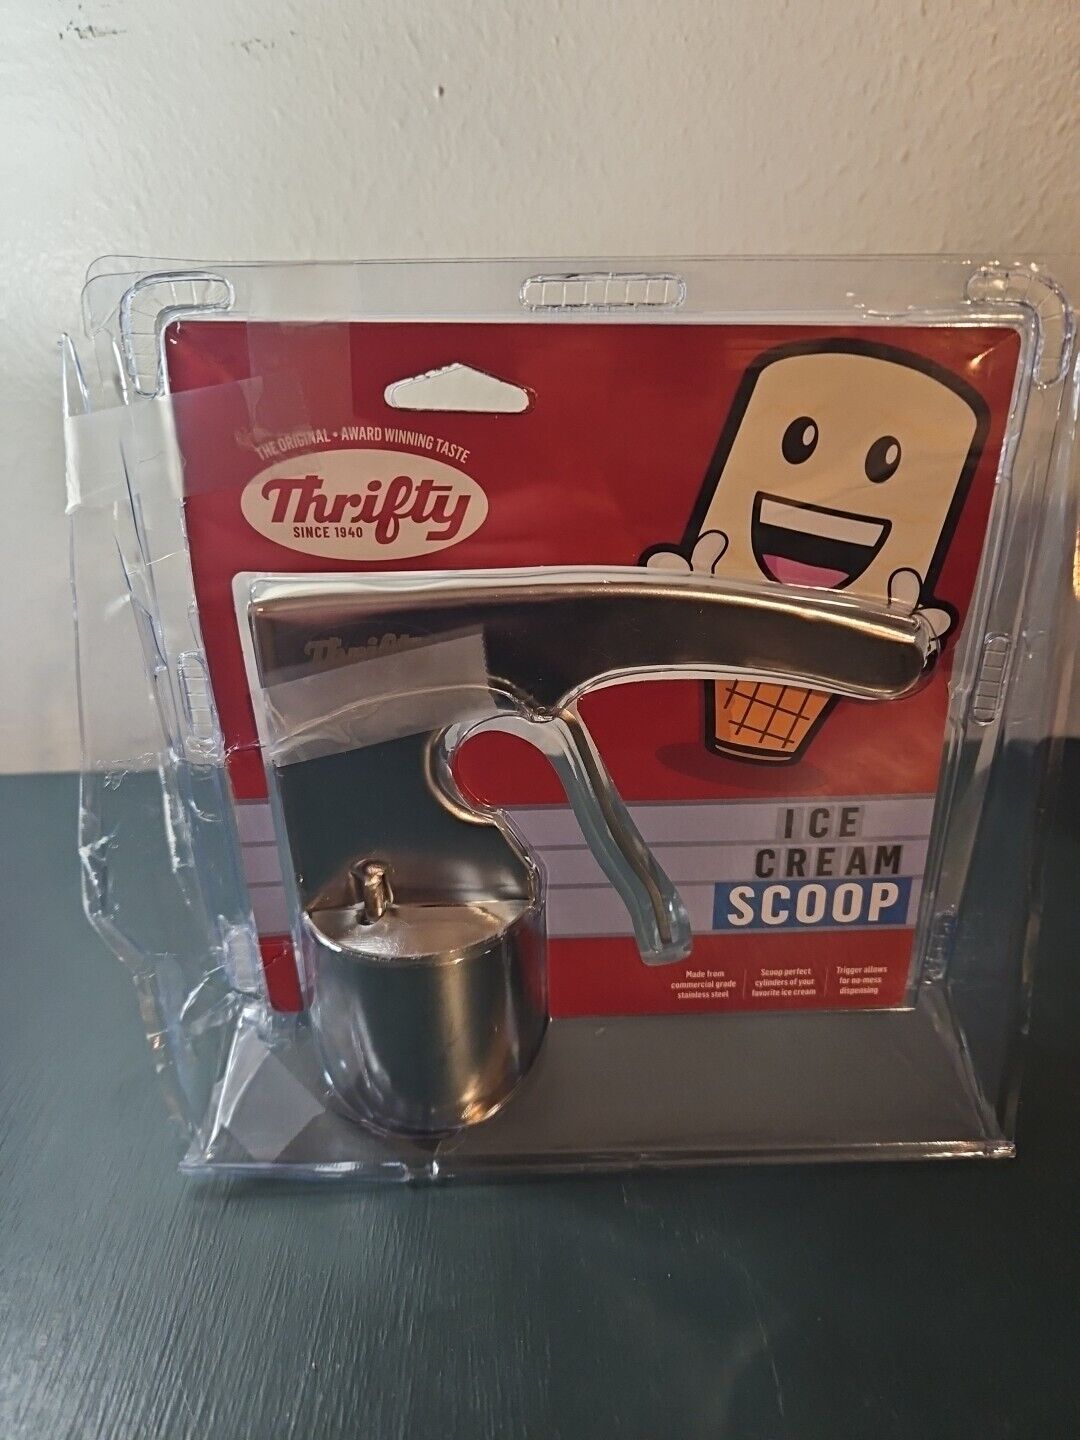 Thrifty Limited Edition Rite Aid Holiday Ice Cream Scooper Open Box/ Damaged Box